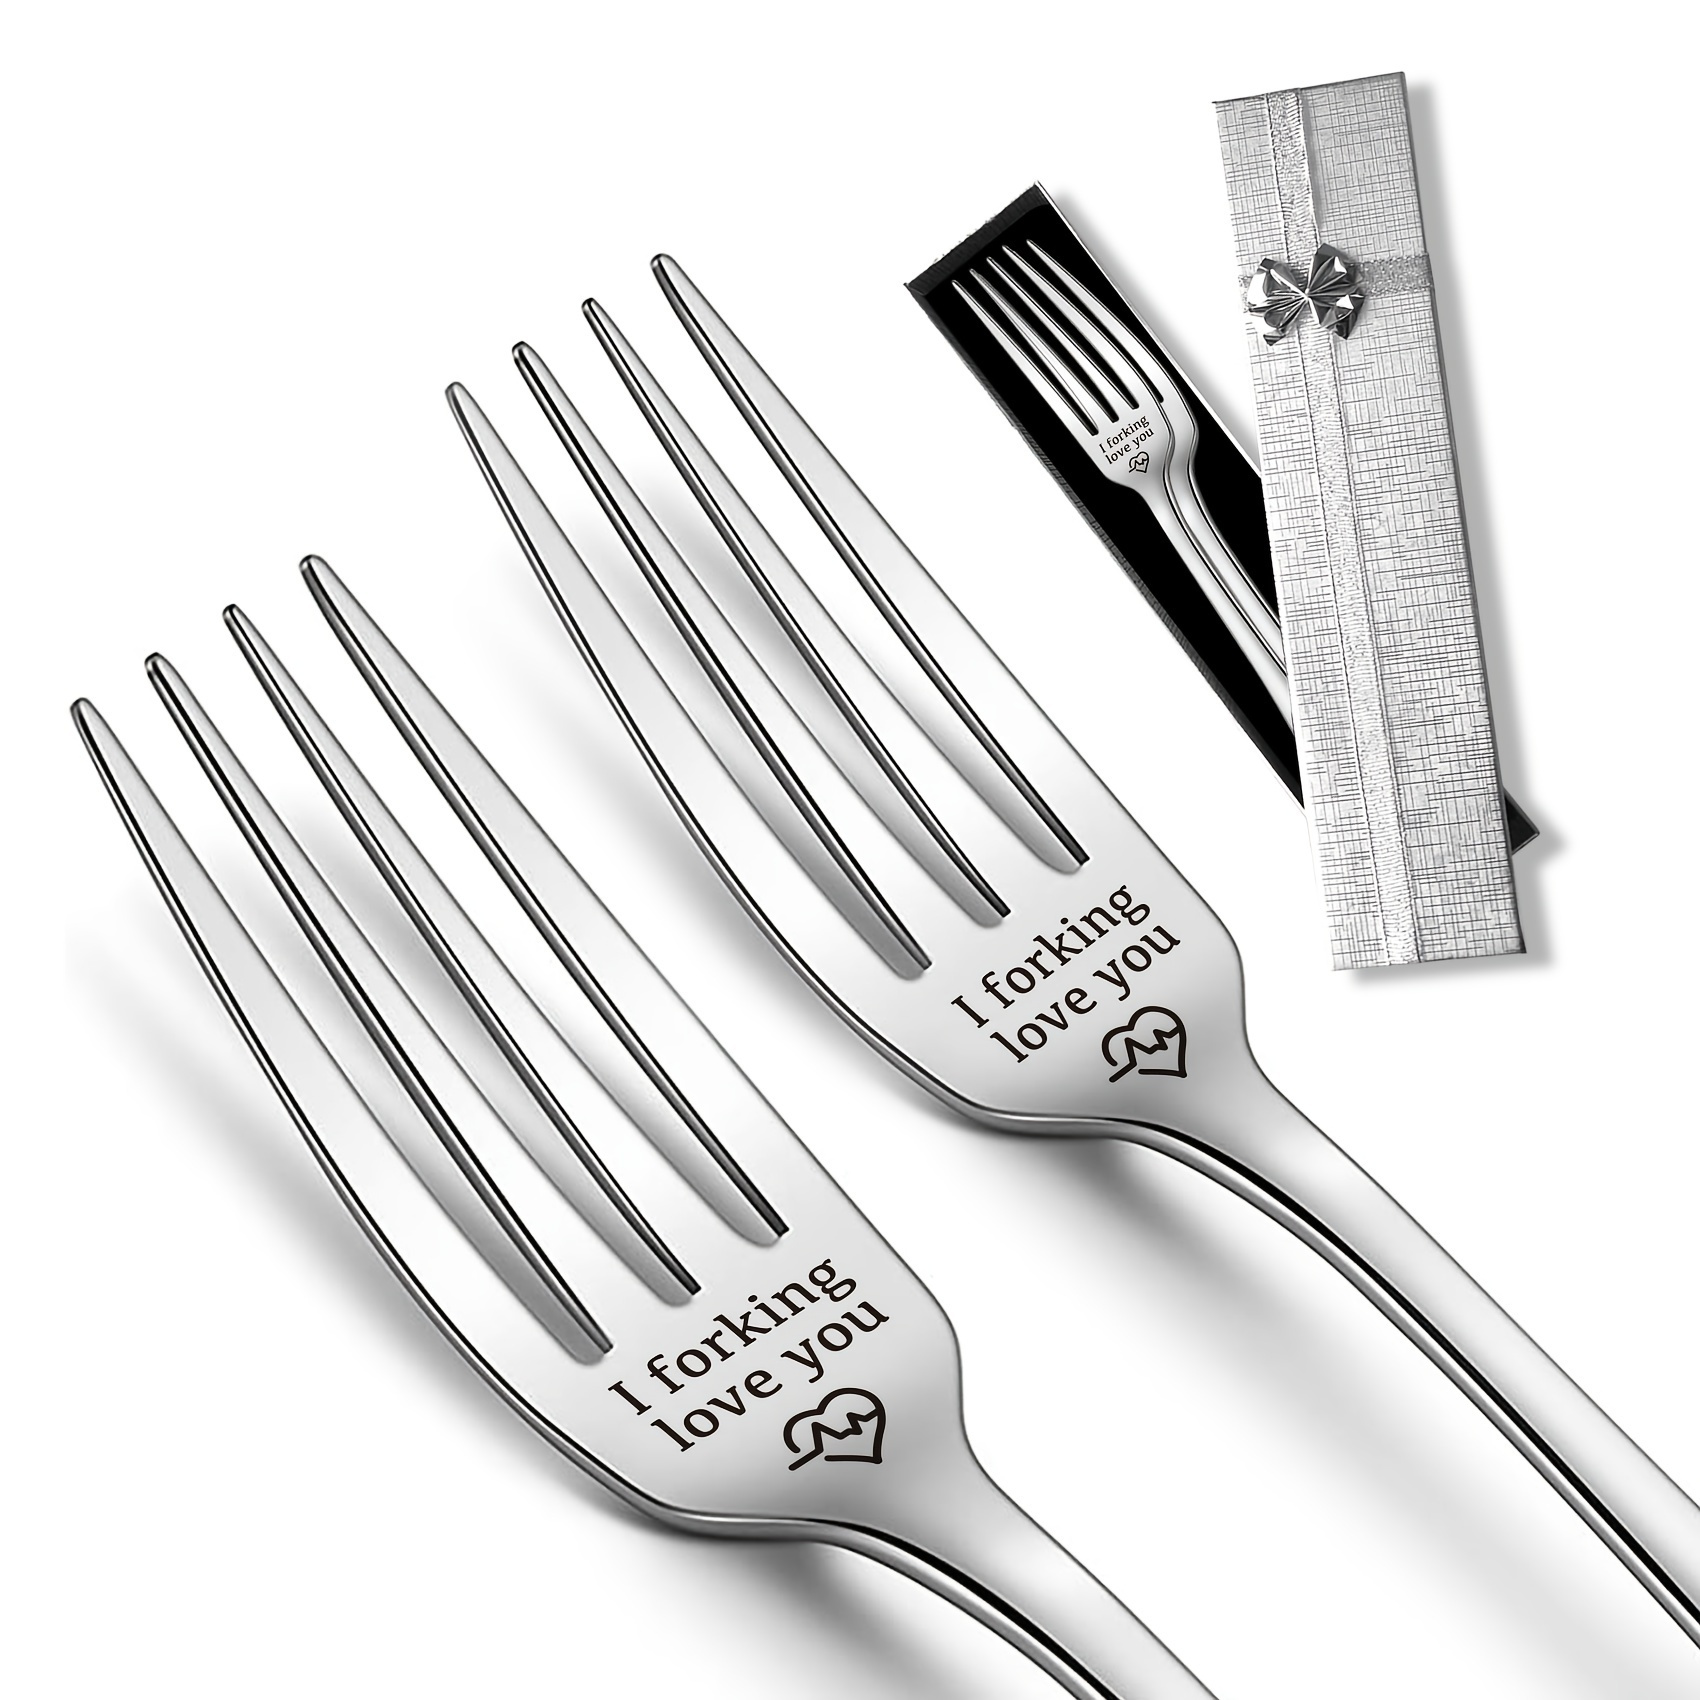 

2pcs Forks With "i Forking Love You" Print, Stainless Steel Tableware For Anniversary Birthday Valentine's Day Gift, For Outdoor Camping